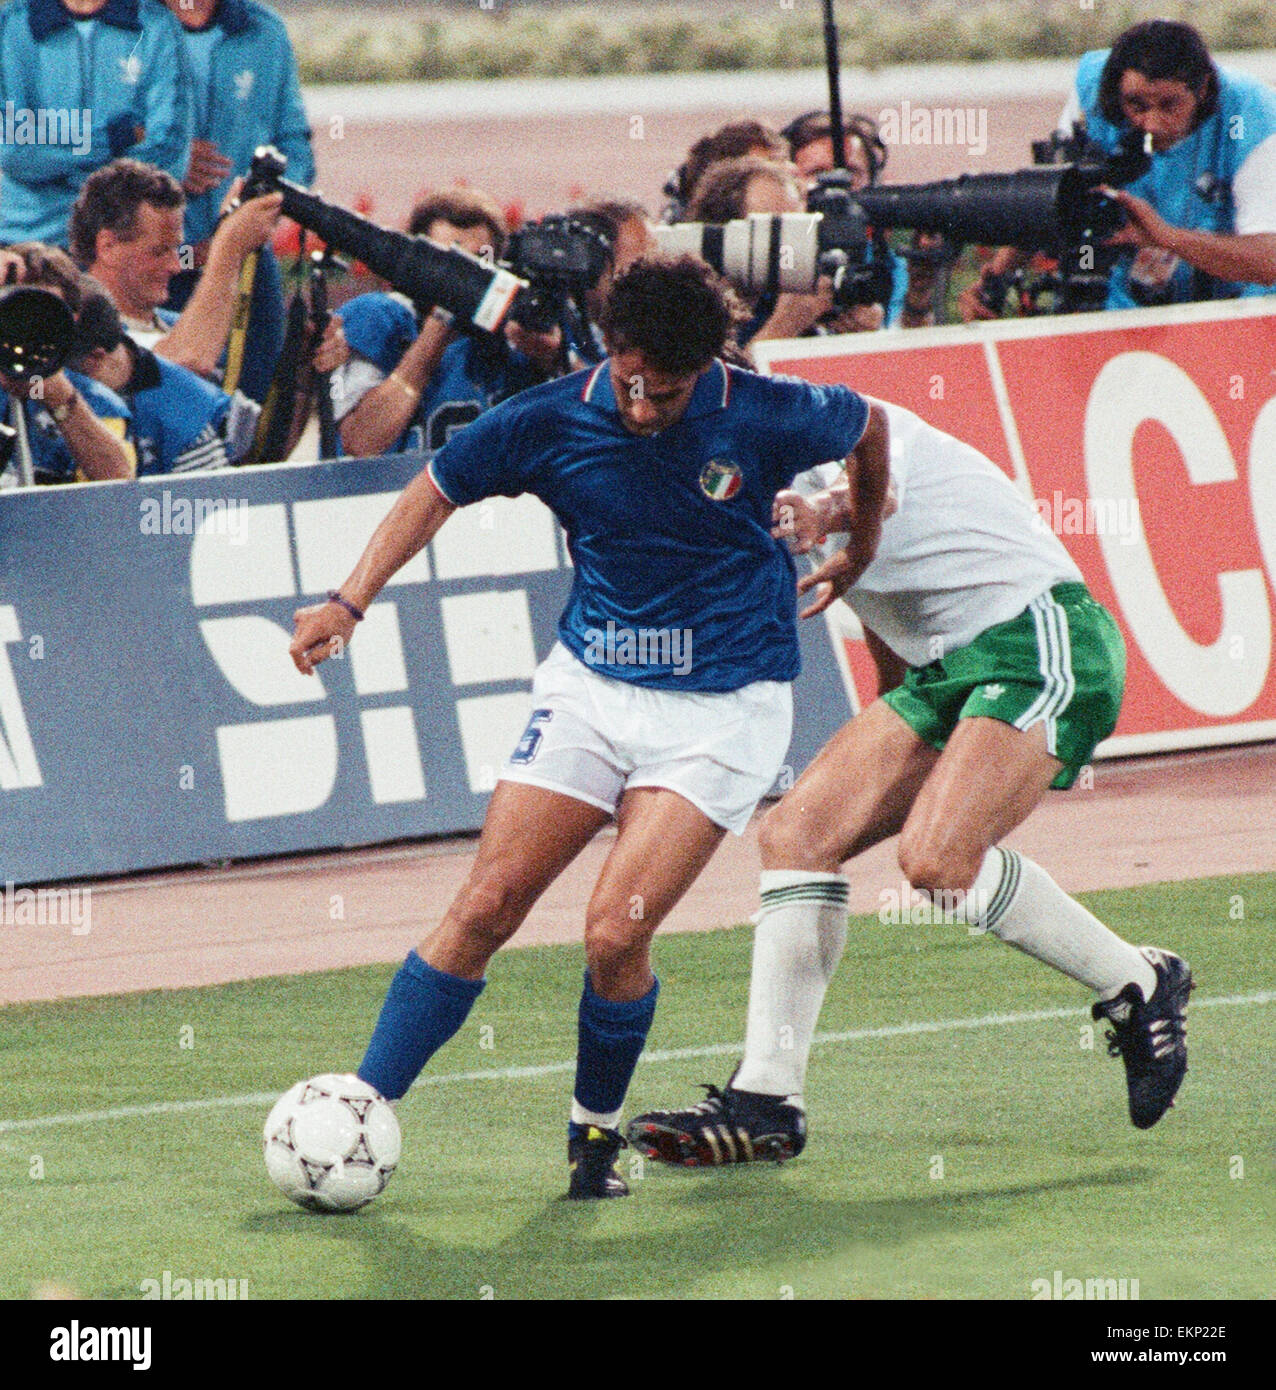 1990 World Cup Quarter Final match in Rome, Italy. Italy 1 v Republic of Ireland 0. Italy's Roberto Baggio challenged for the ball. 30th June 1990. Stock Photo